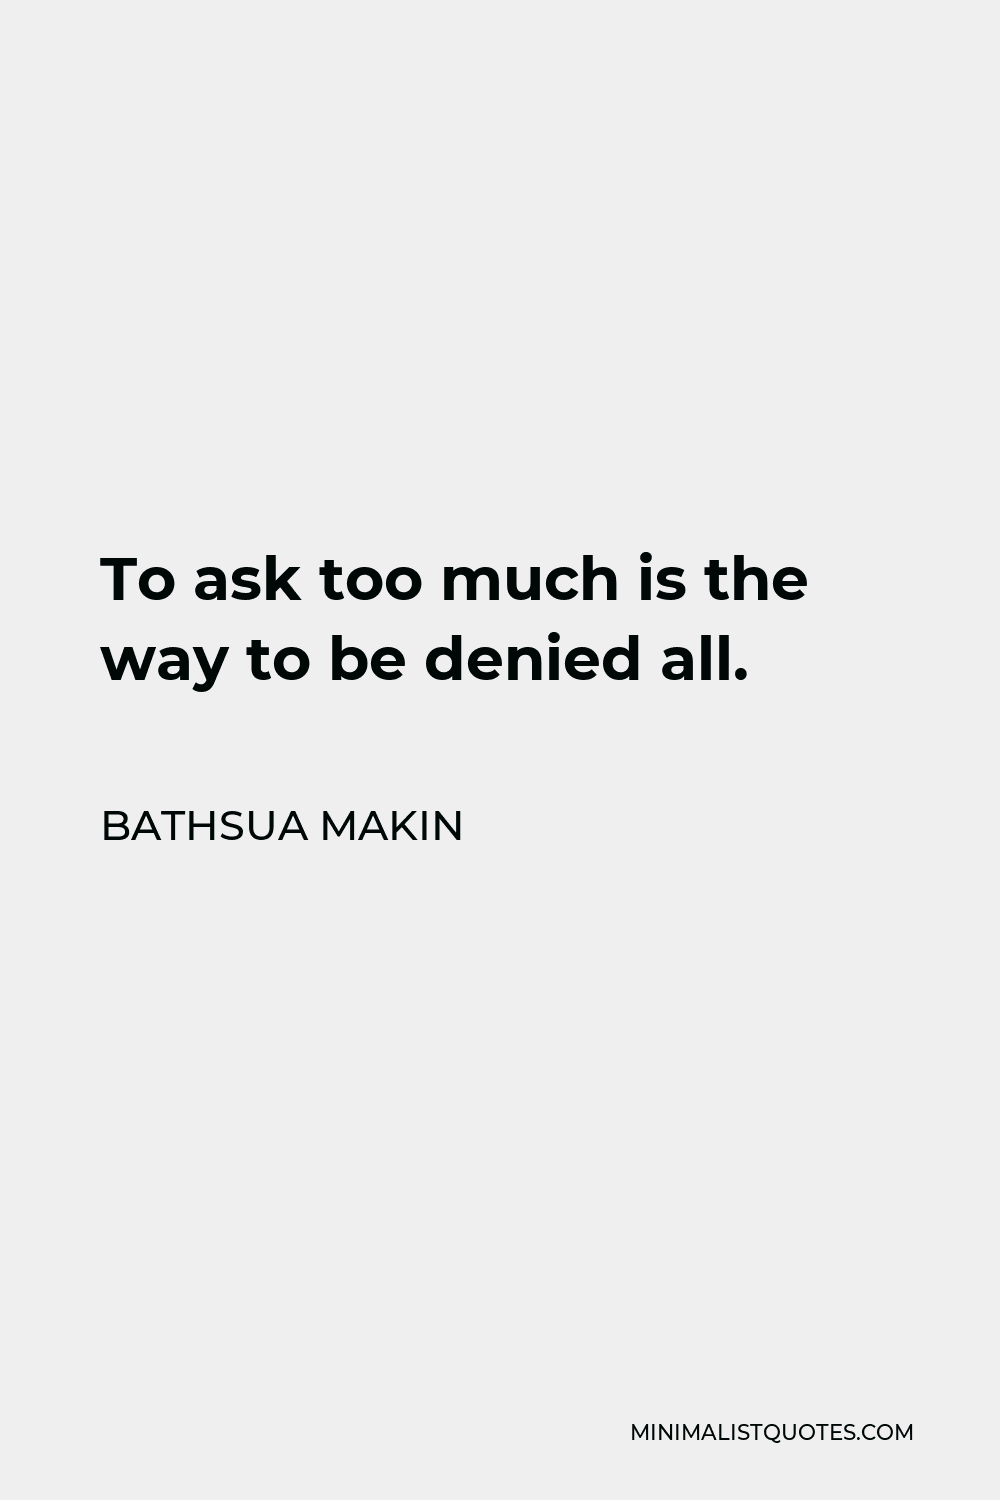 Bathsua Makin Quote - To ask too much is the way to be denied all.